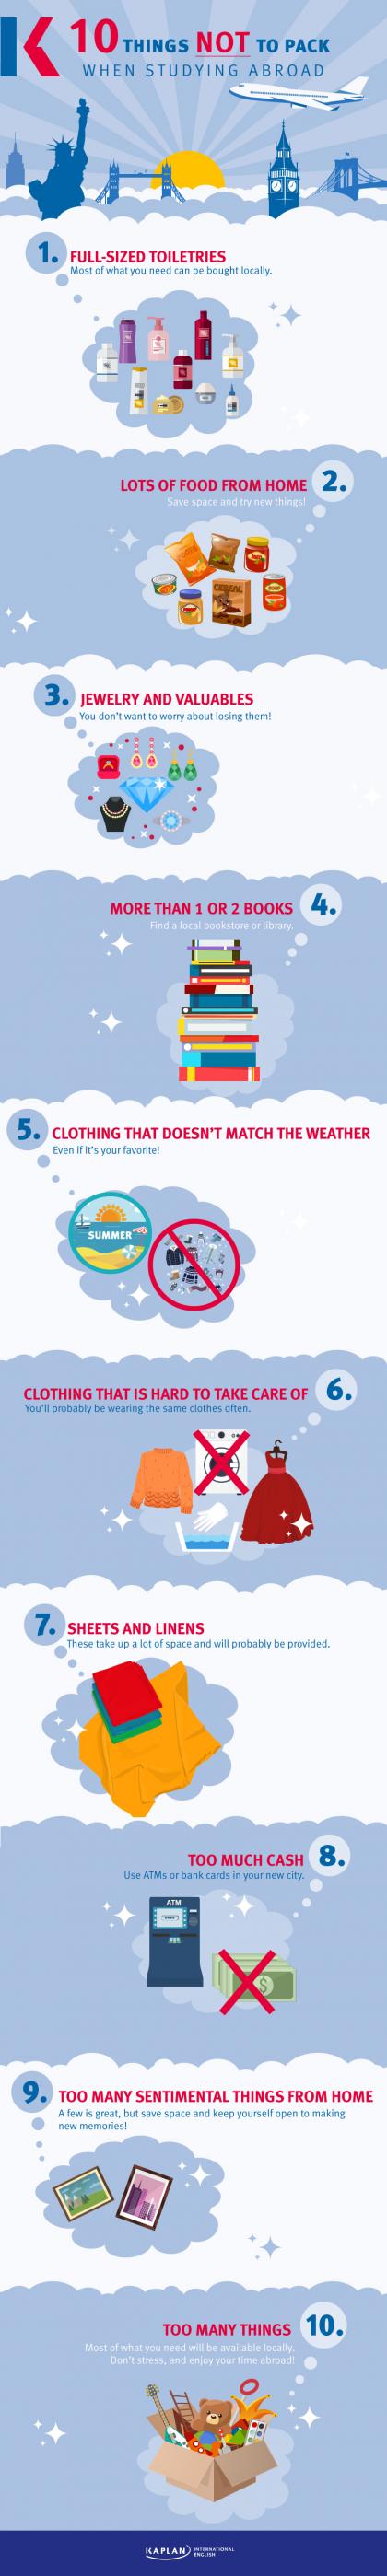 10 things not to pack when studying abroad 